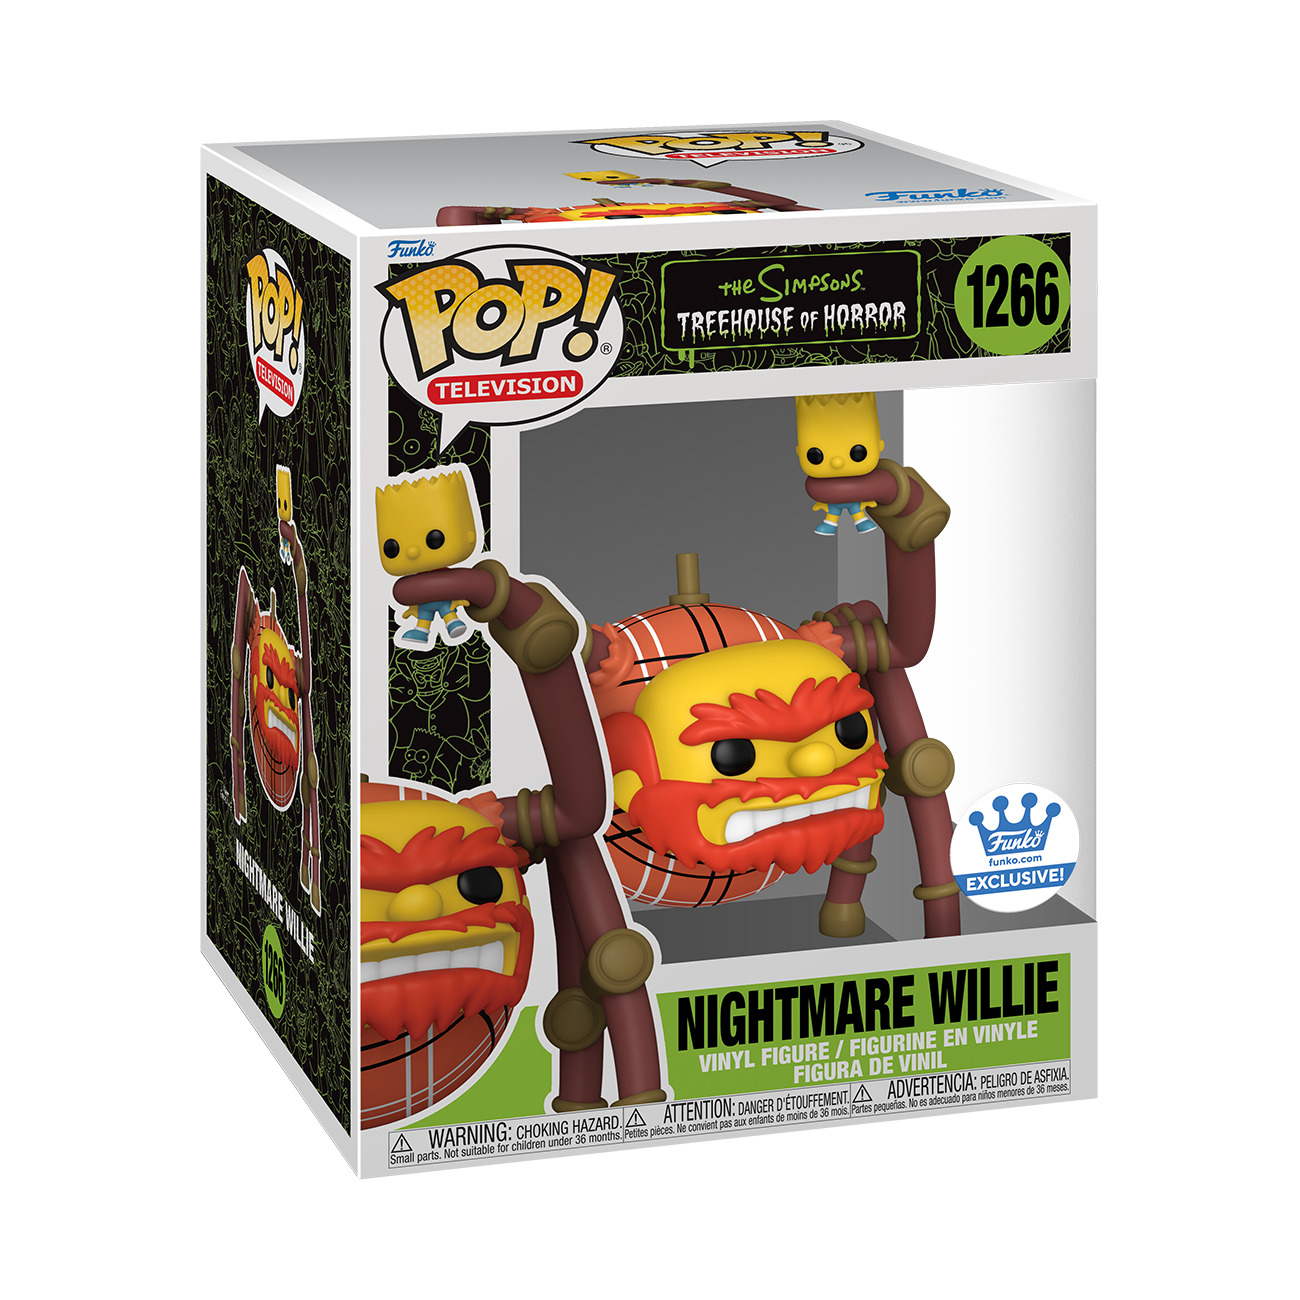 Funko POP Nightmare Willie The Simpsons Treehouse of Horror #1266 [Funko Shop]